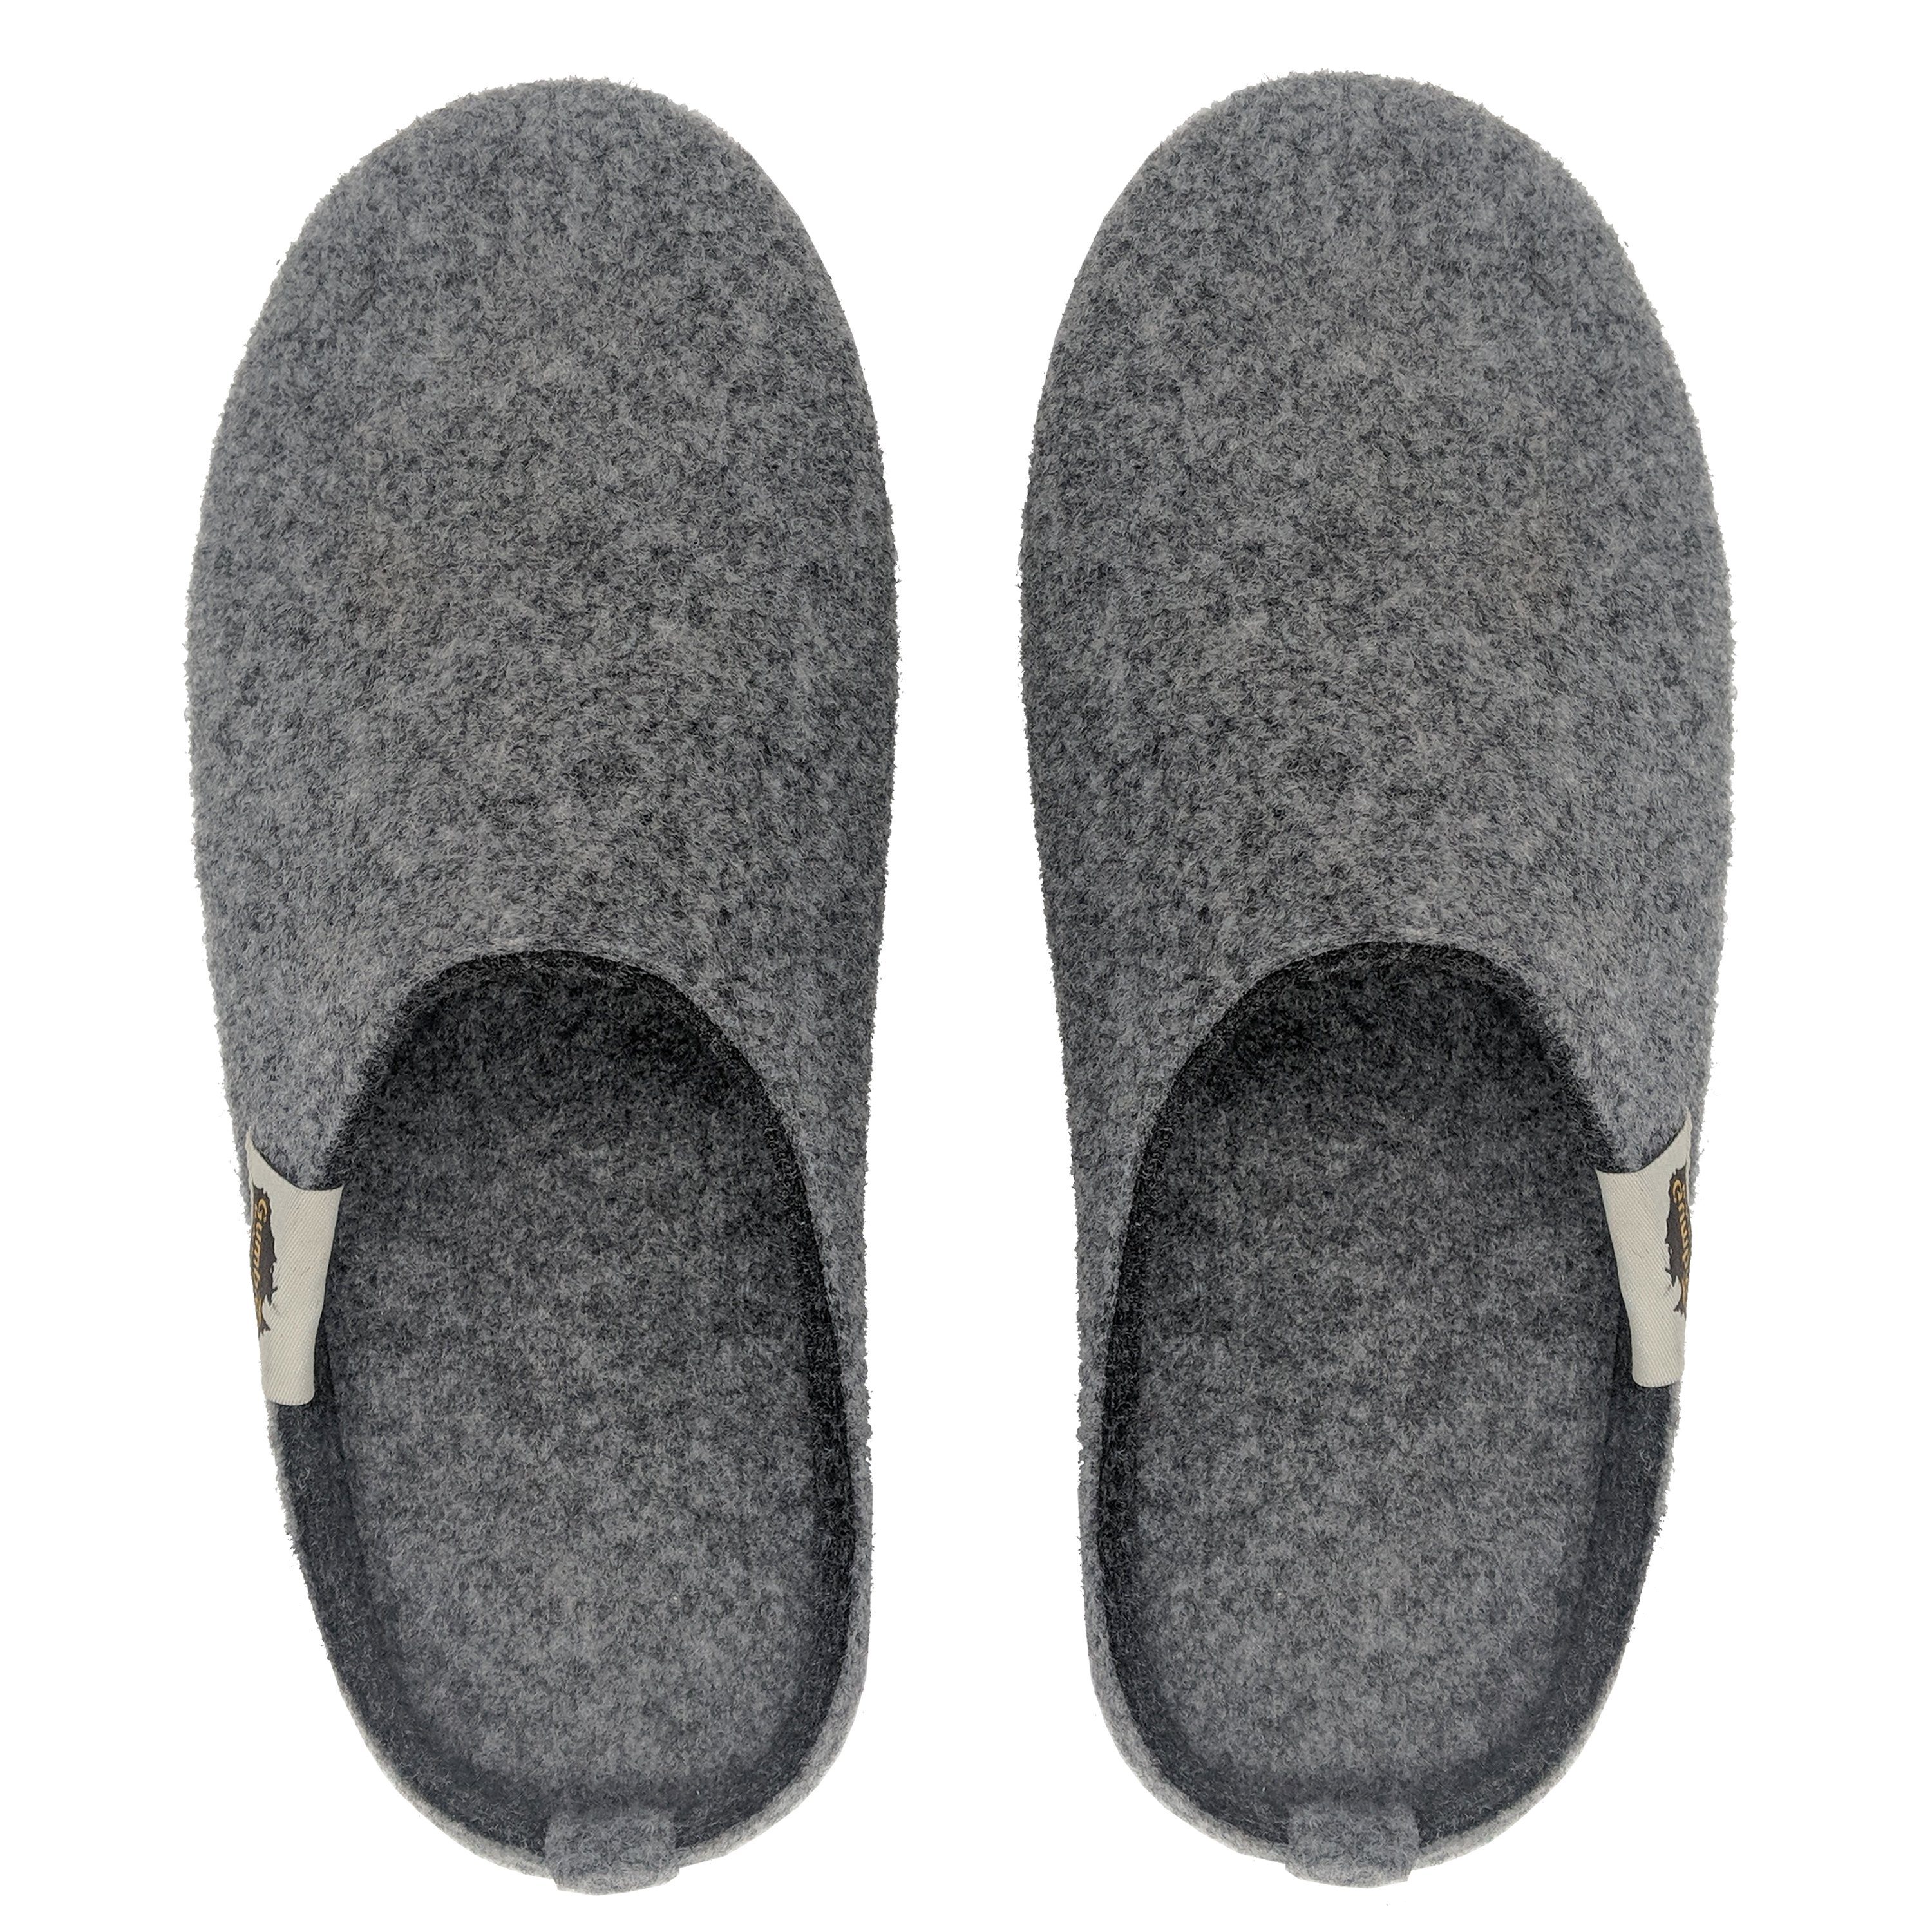 Hausschuh »in Designs« Outback Gumbies Charcoal in farbenfrohen Slipper recycelten Grey Materialien aus